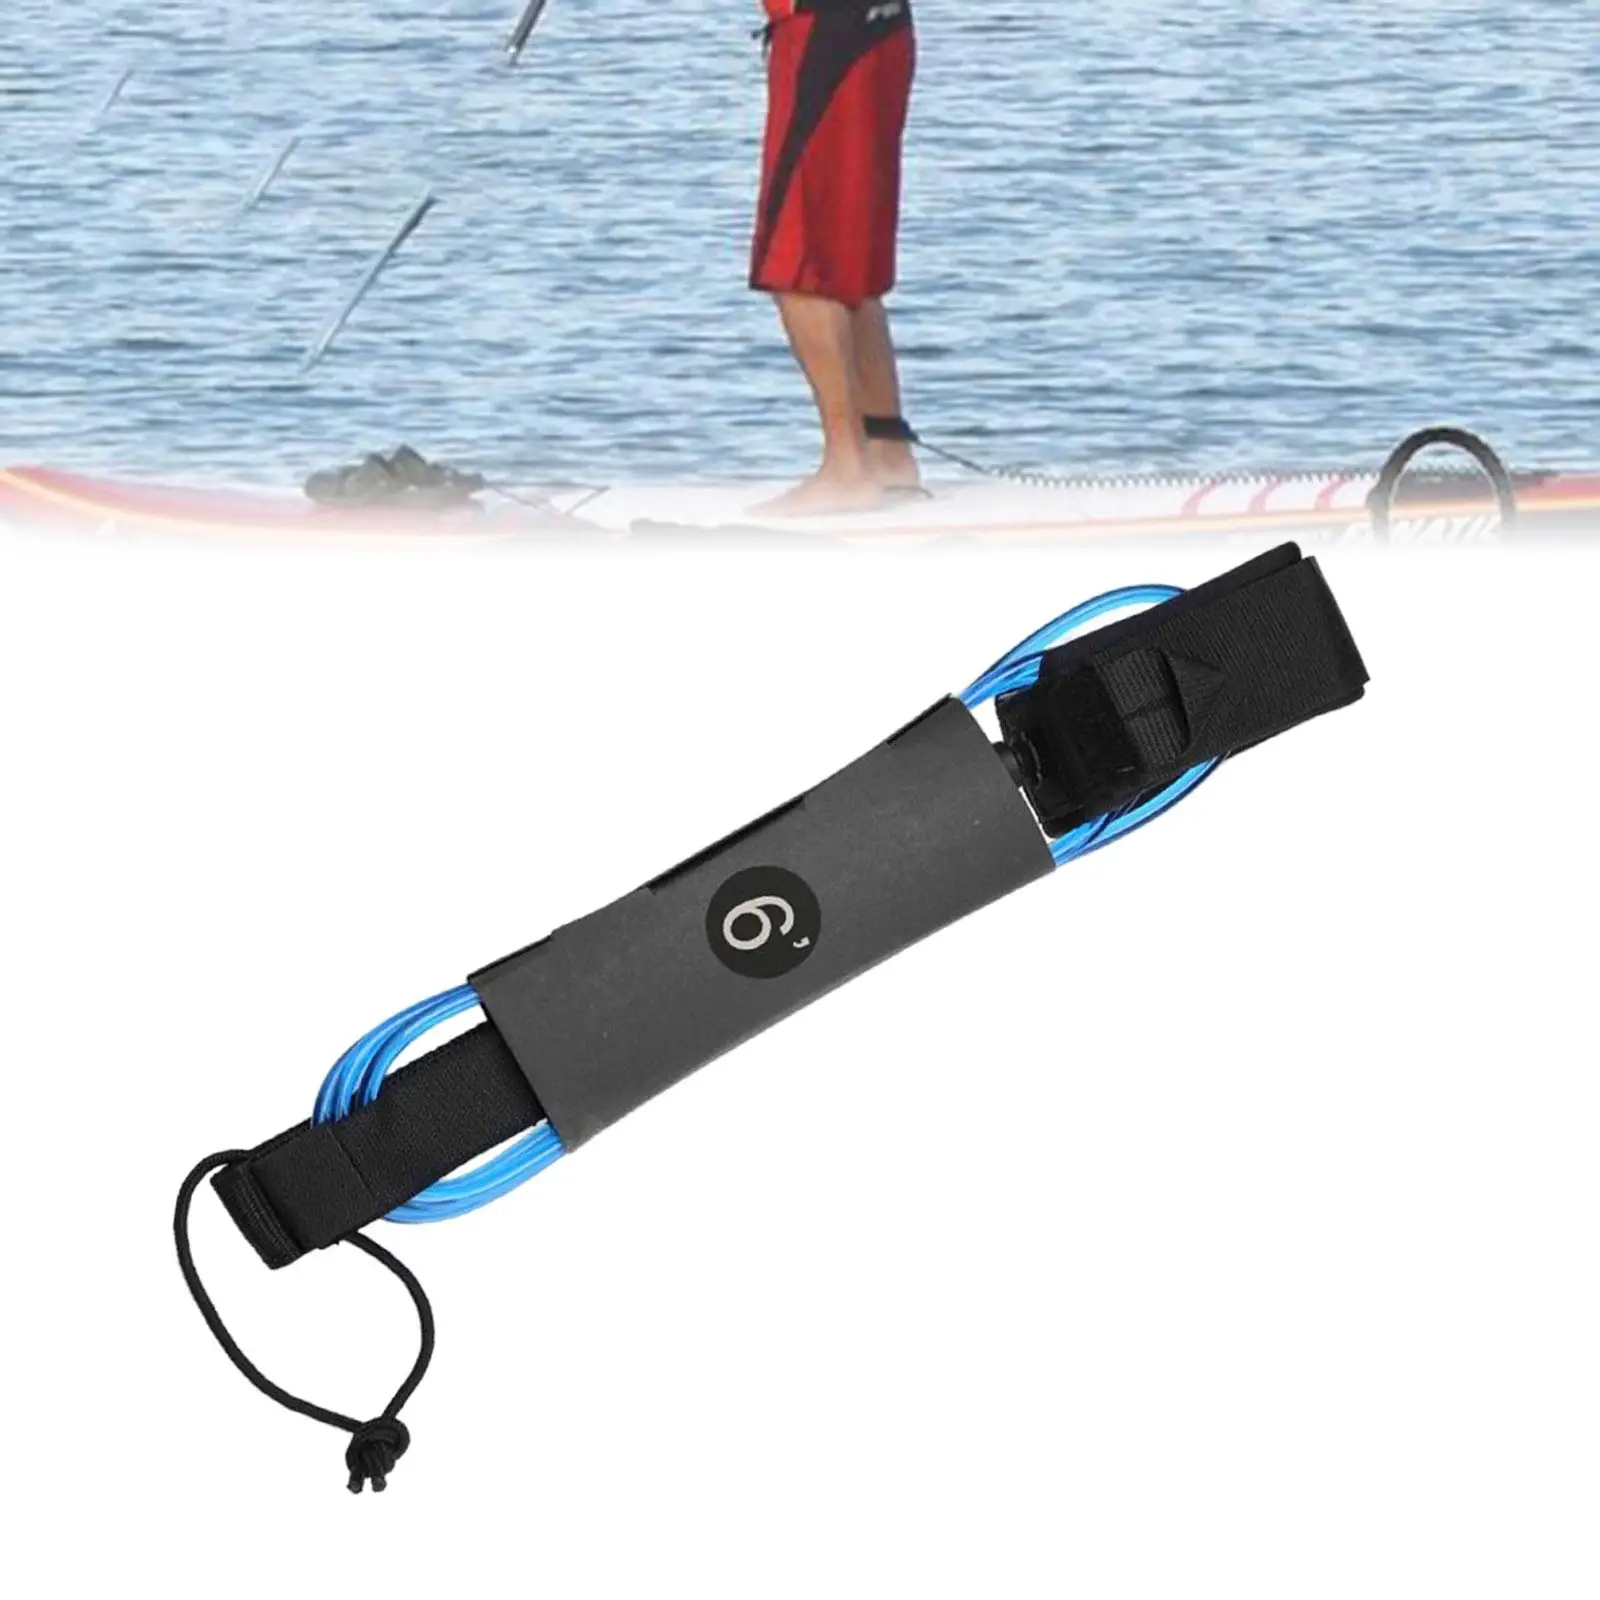 Surfboard Leash, TPU Surf Leashes, Adjustable Stand Up Surfing Ankle Strap Leg Rope for Surfboard Paddleboard Canoe Boat